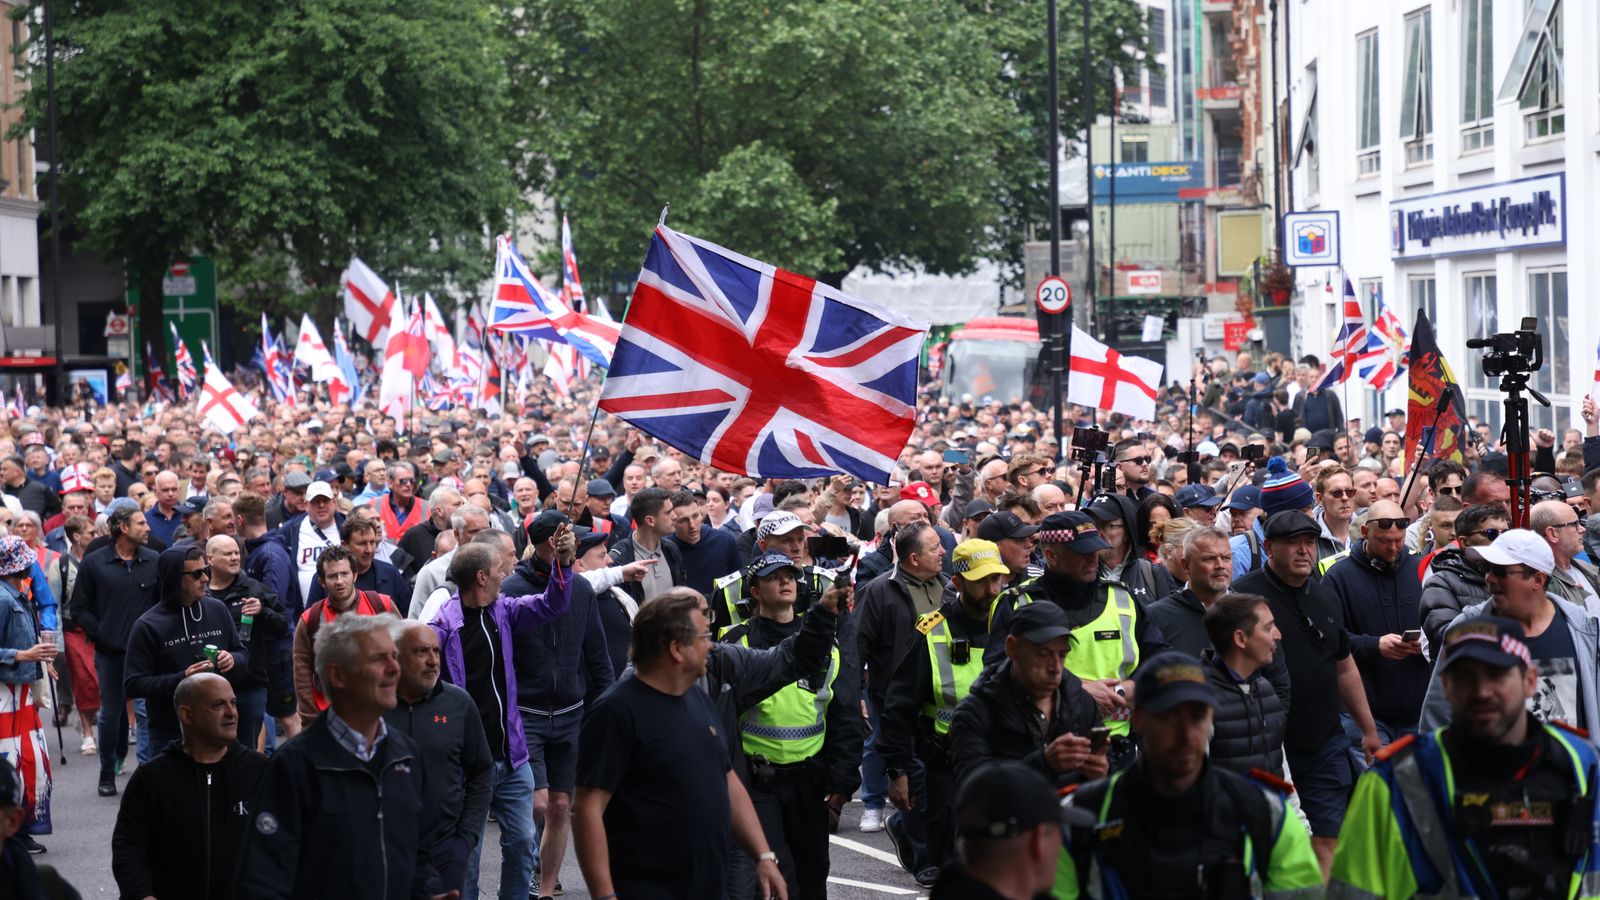 Heavy police presence in London as protests heat up and Champions League final draws closer